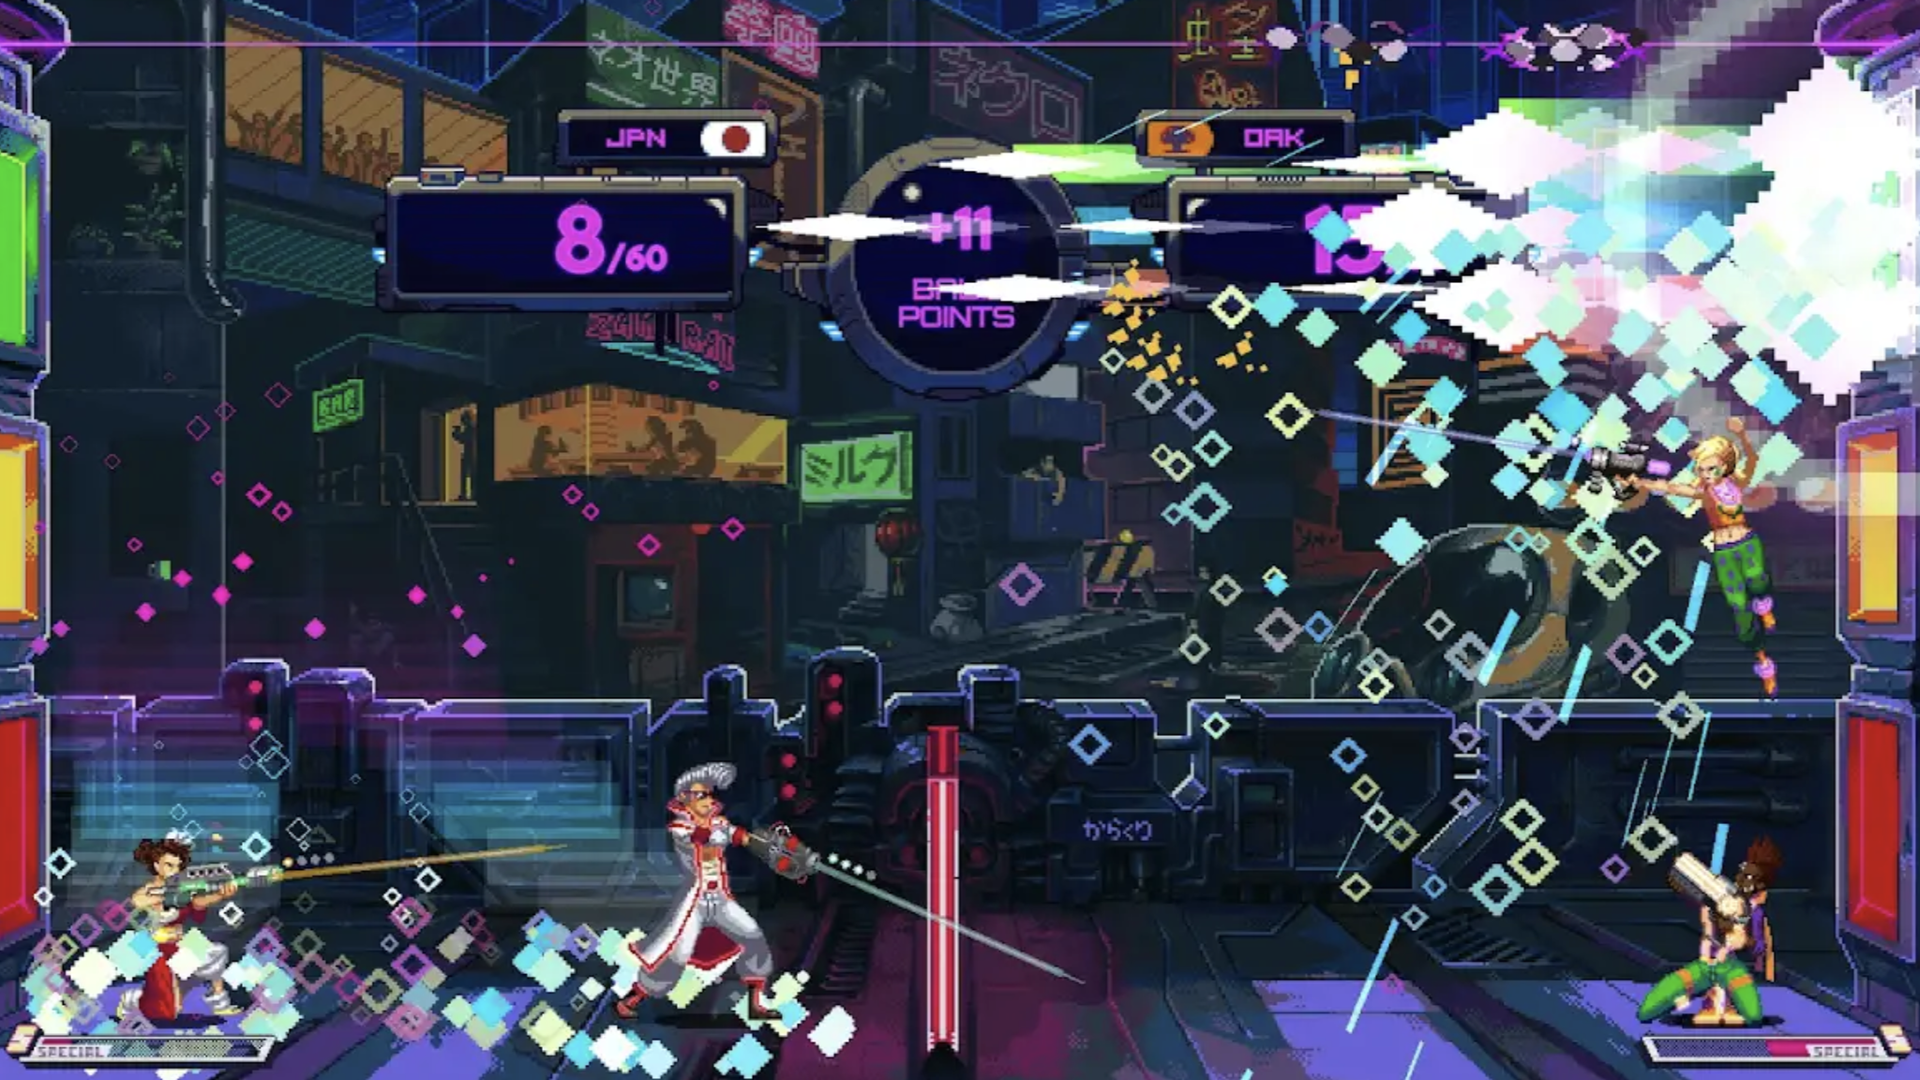 Video game screenshot of a futuristic video game in which people are using guns to play volleyball